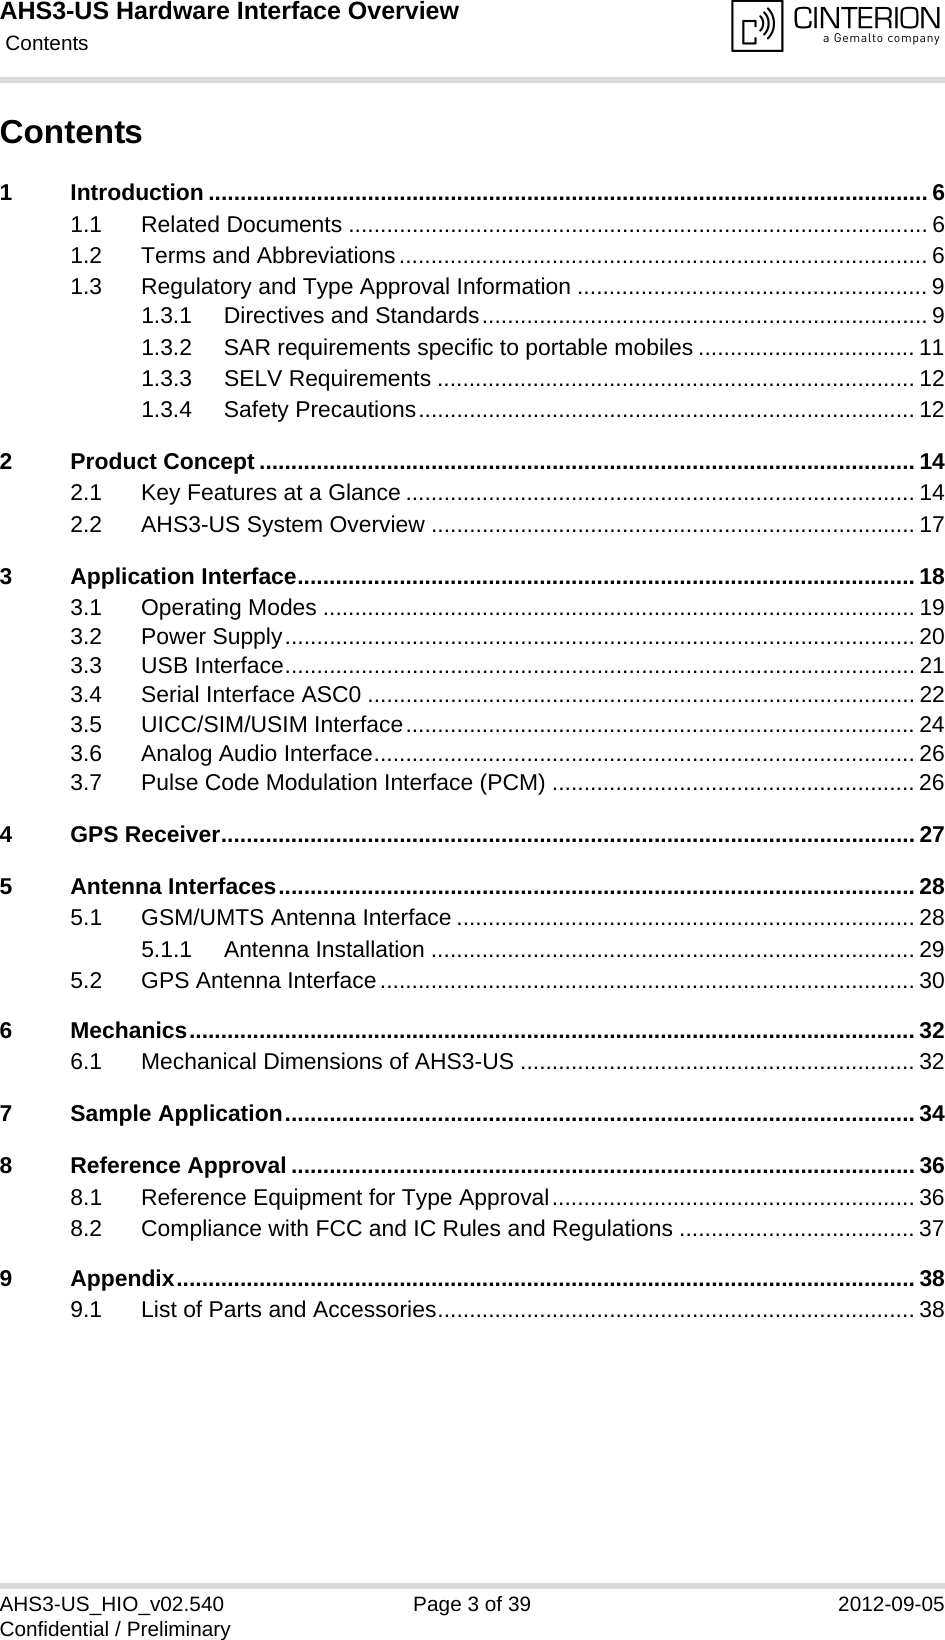 AHS3-US Hardware Interface Overview Contents39AHS3-US_HIO_v02.540 Page 3 of 39 2012-09-05Confidential / PreliminaryContents1 Introduction ................................................................................................................. 61.1 Related Documents ........................................................................................... 61.2 Terms and Abbreviations................................................................................... 61.3 Regulatory and Type Approval Information ....................................................... 91.3.1 Directives and Standards...................................................................... 91.3.2 SAR requirements specific to portable mobiles .................................. 111.3.3 SELV Requirements ........................................................................... 121.3.4 Safety Precautions.............................................................................. 122 Product Concept ....................................................................................................... 142.1 Key Features at a Glance ................................................................................ 142.2 AHS3-US System Overview ............................................................................ 173 Application Interface................................................................................................. 183.1 Operating Modes ............................................................................................. 193.2 Power Supply................................................................................................... 203.3 USB Interface................................................................................................... 213.4 Serial Interface ASC0 ...................................................................................... 223.5 UICC/SIM/USIM Interface................................................................................ 243.6 Analog Audio Interface..................................................................................... 263.7 Pulse Code Modulation Interface (PCM) ......................................................... 264 GPS Receiver............................................................................................................. 275 Antenna Interfaces.................................................................................................... 285.1 GSM/UMTS Antenna Interface ........................................................................ 285.1.1 Antenna Installation ............................................................................ 295.2 GPS Antenna Interface.................................................................................... 306 Mechanics.................................................................................................................. 326.1 Mechanical Dimensions of AHS3-US .............................................................. 327 Sample Application................................................................................................... 348 Reference Approval .................................................................................................. 368.1 Reference Equipment for Type Approval......................................................... 368.2 Compliance with FCC and IC Rules and Regulations ..................................... 379 Appendix.................................................................................................................... 389.1 List of Parts and Accessories........................................................................... 38